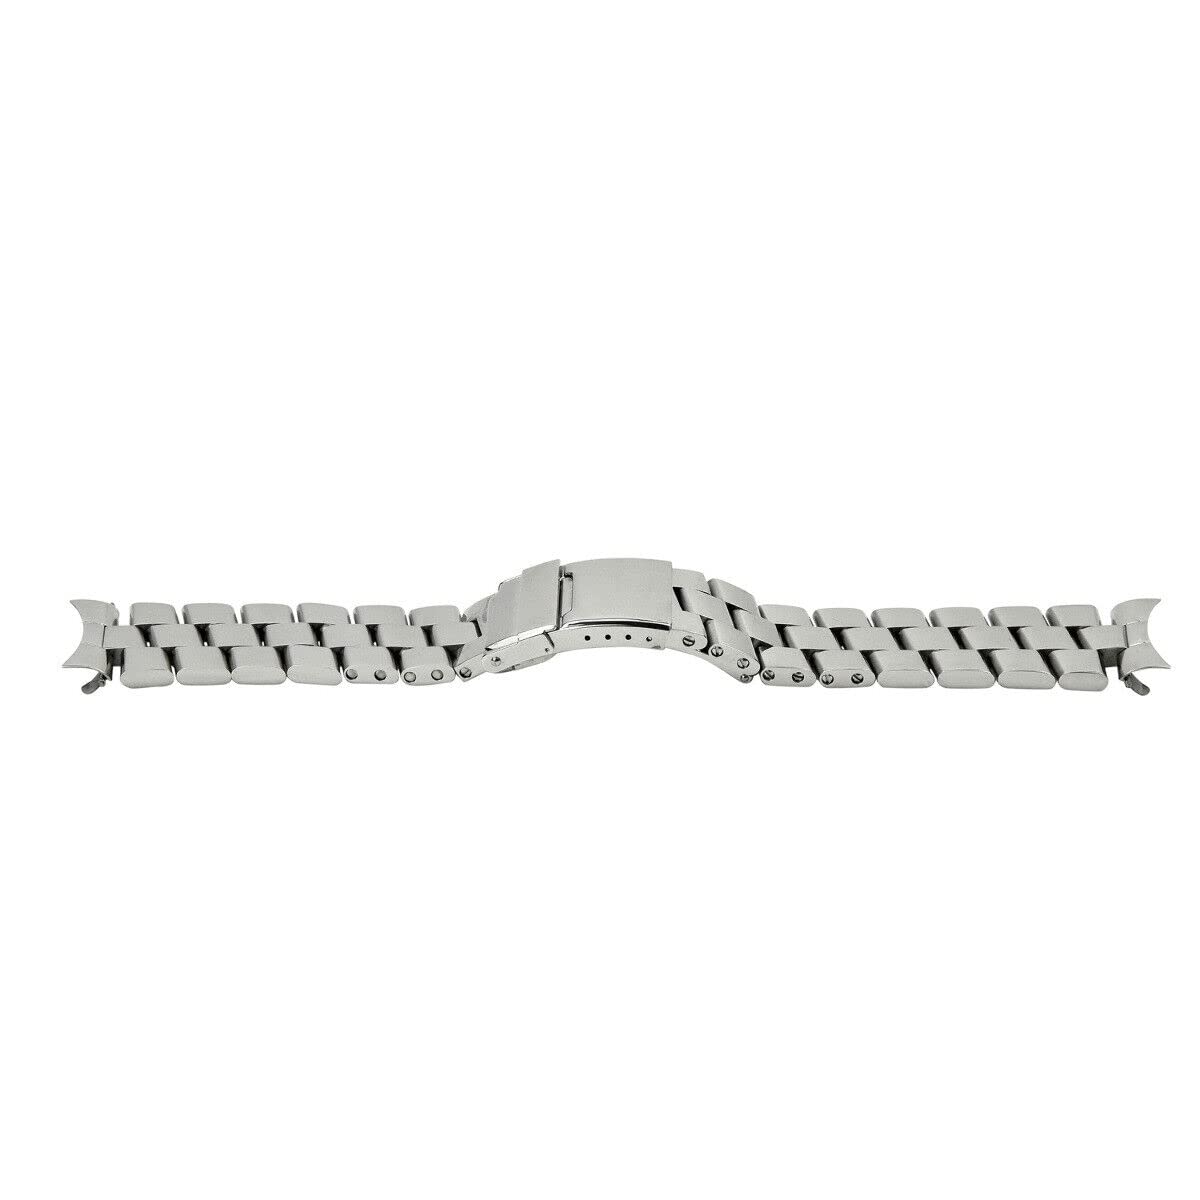 Ewatchparts 22MM WATCH BAND BRACELET FOR BREITLING SUPEROCEAN ABYSS COLT POLISHED CURVED END